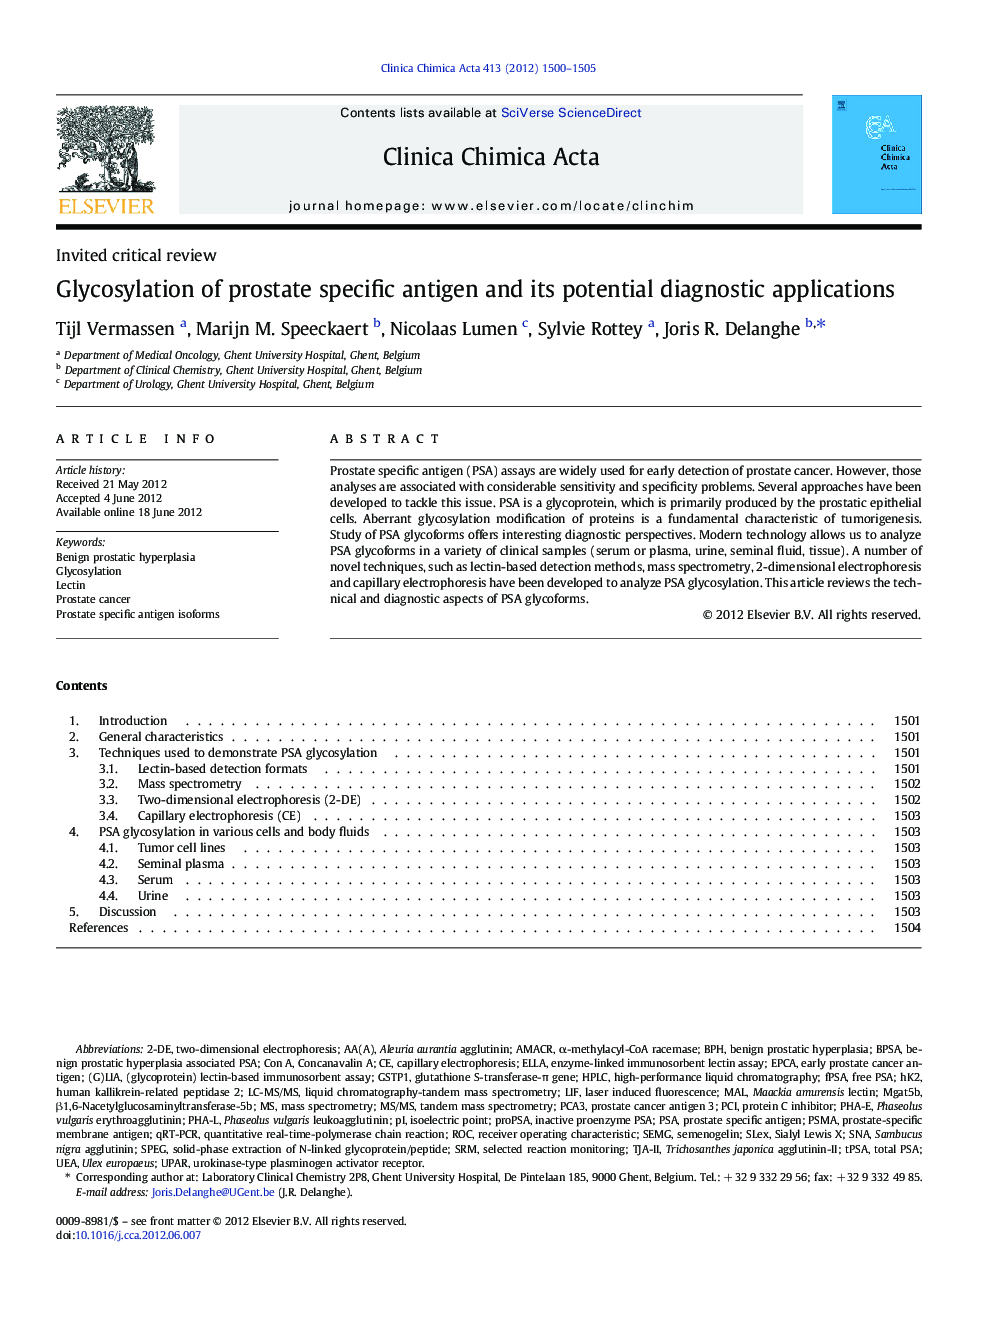 Glycosylation of prostate specific antigen and its potential diagnostic applications